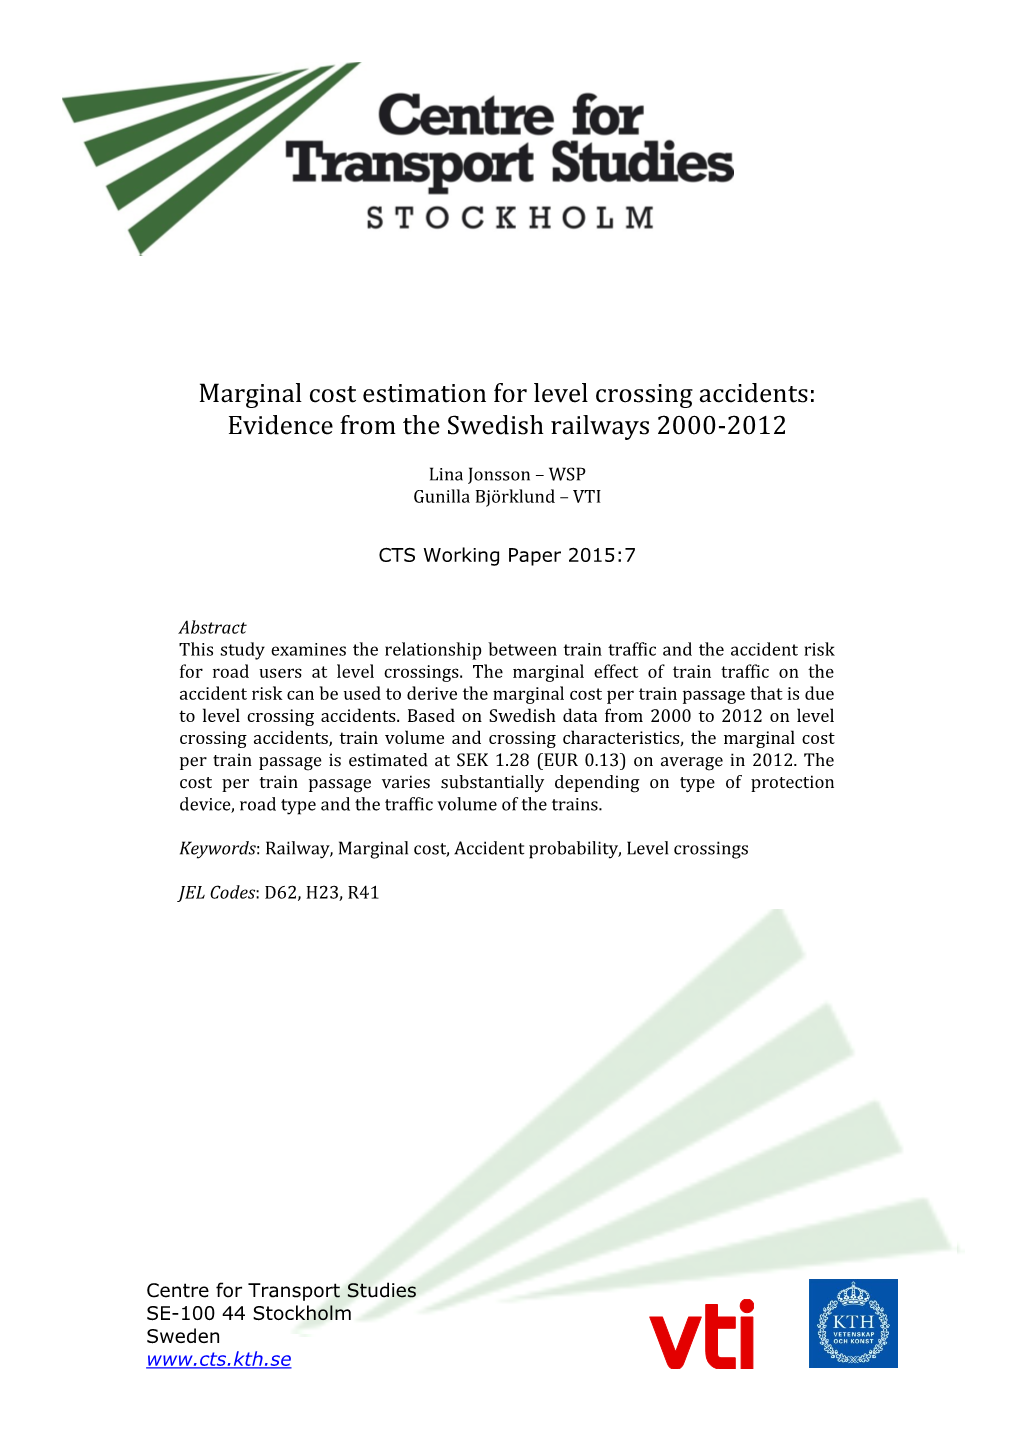 Marginal Cost Estimation for Level Crossing Accidents: Evidence from the Swedish Railways 2000-2012